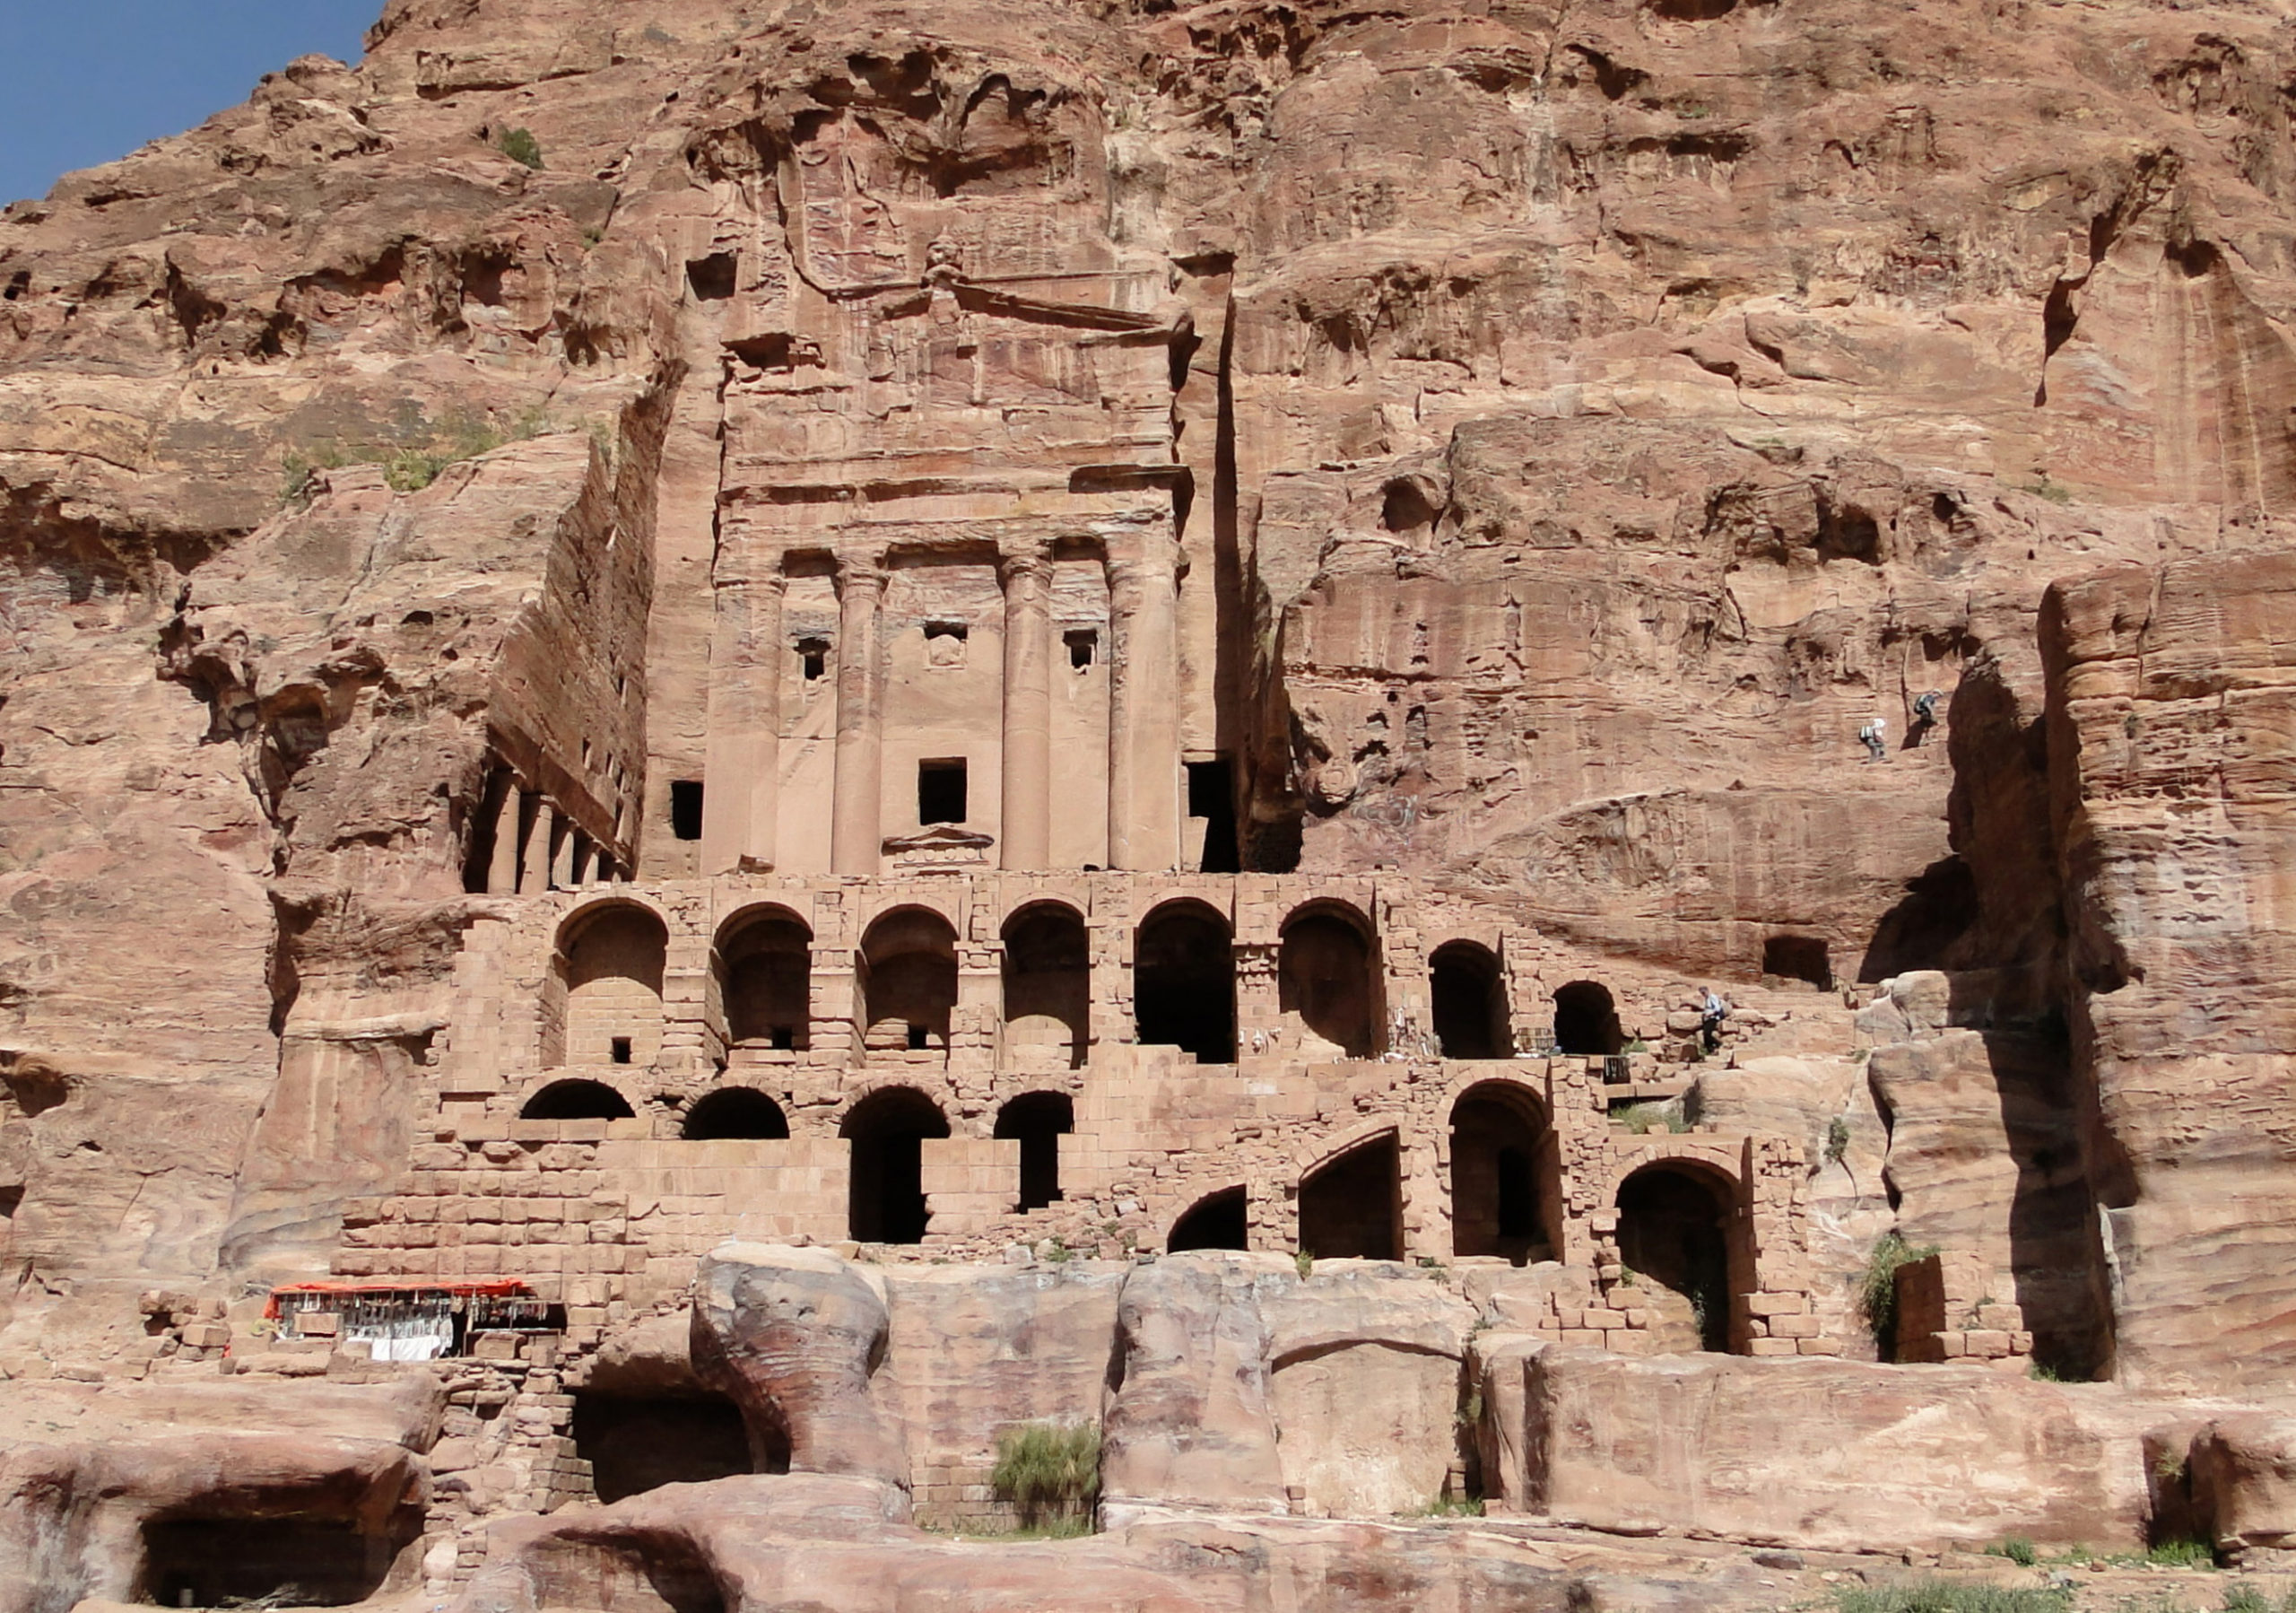 The Urn Tomb in Petra